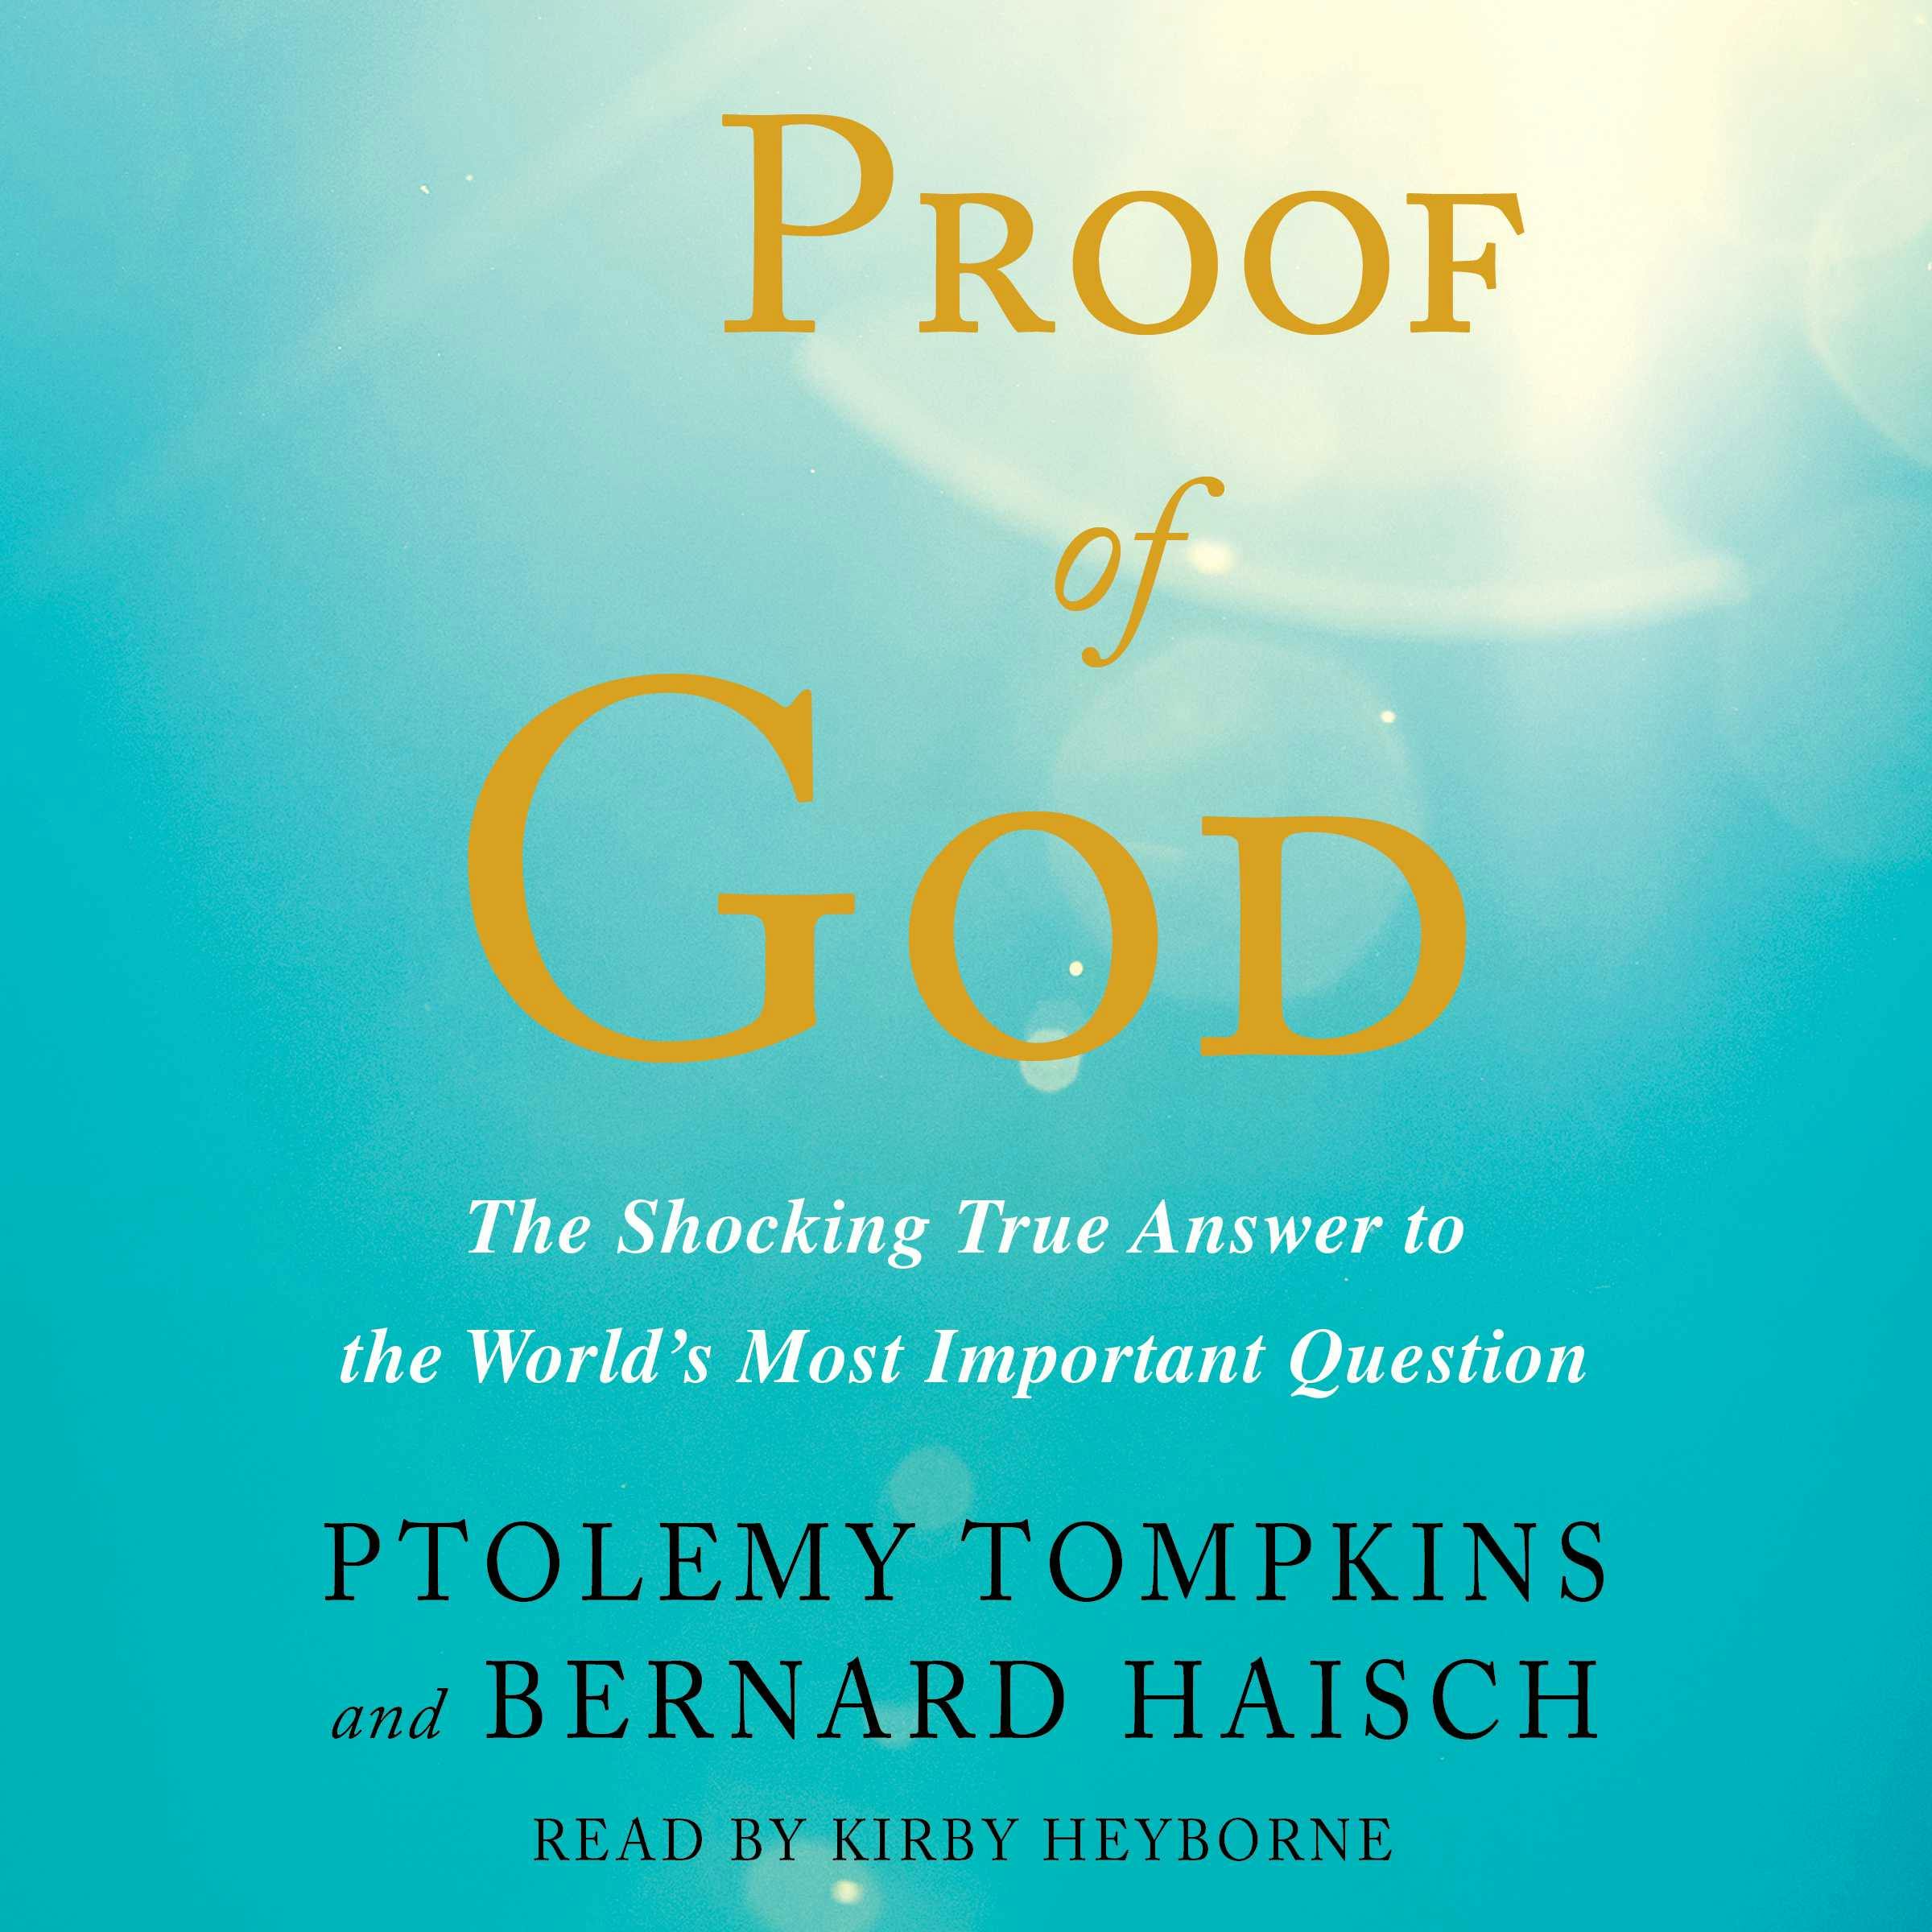 Proof of God: The Shocking True Answer to the World's Most Important Question - Ptolemy Tompkins, Bernard Haisch